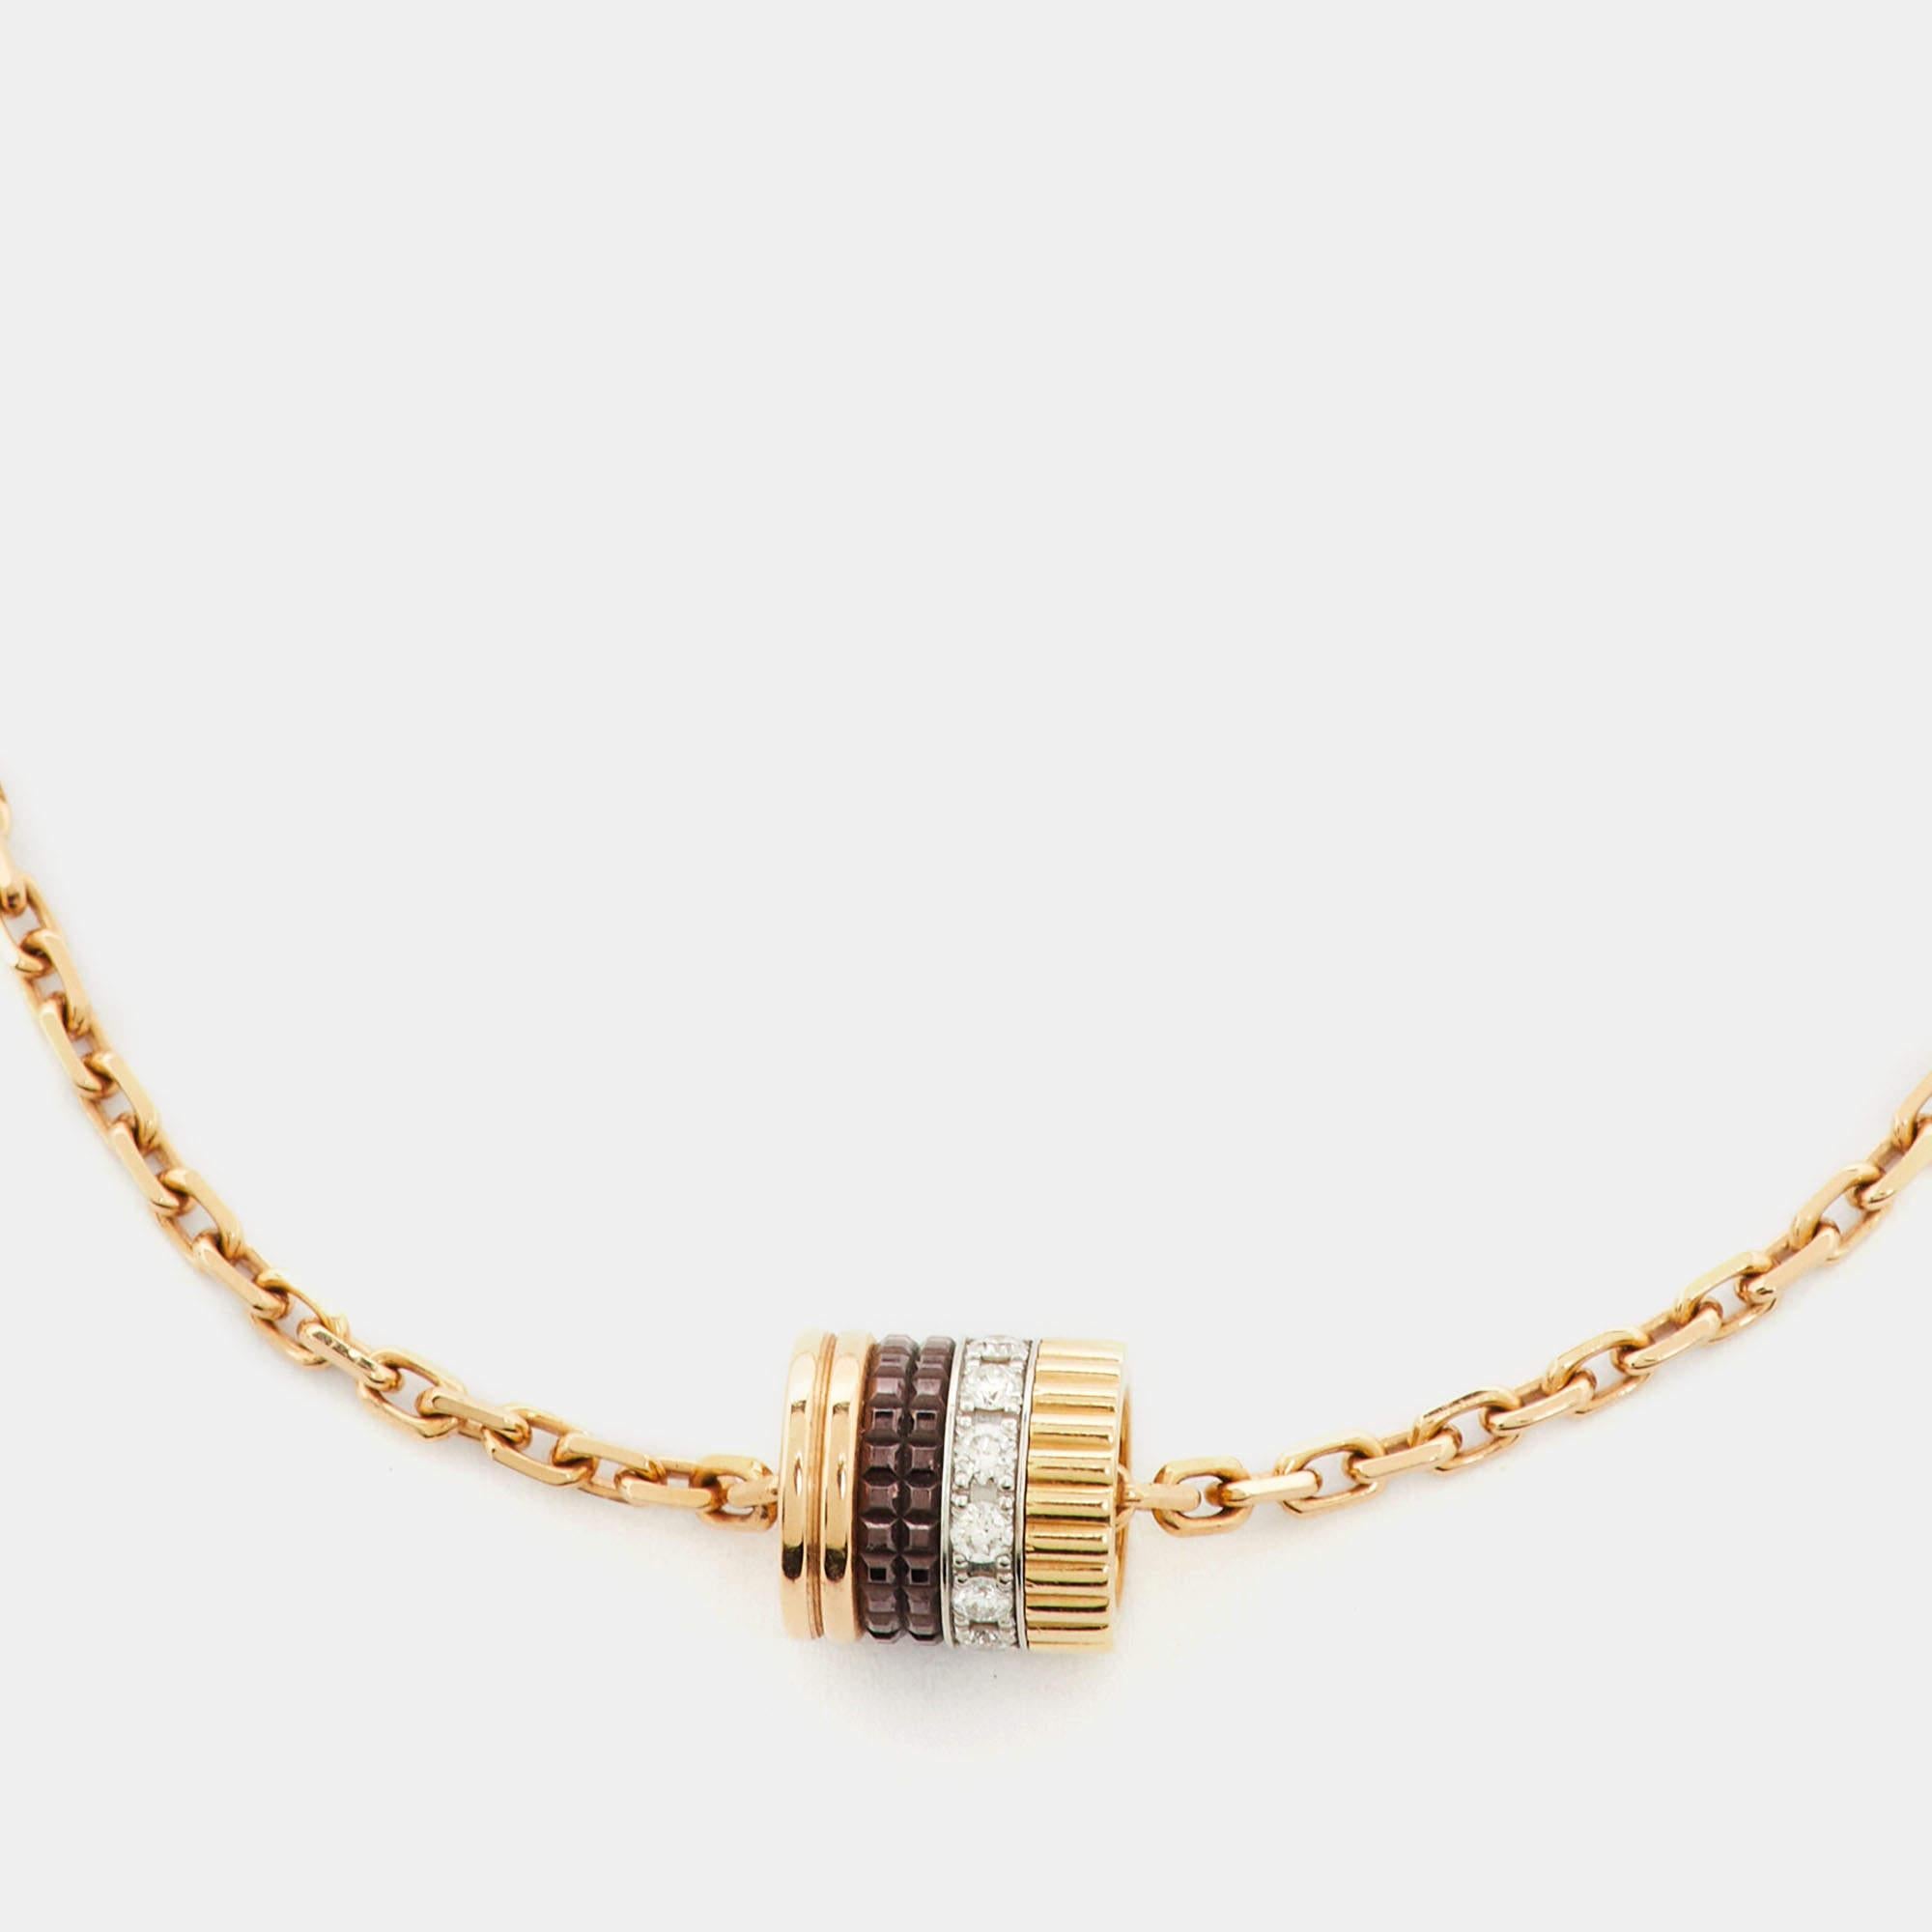 The Boucheron bracelet is a stunning blend of elegance and sophistication. Crafted with precision, it features a brown PVD-coated 18k gold bracelet adorned with diamonds, showcasing a harmonious tri-color design that exudes luxury and modern style.

